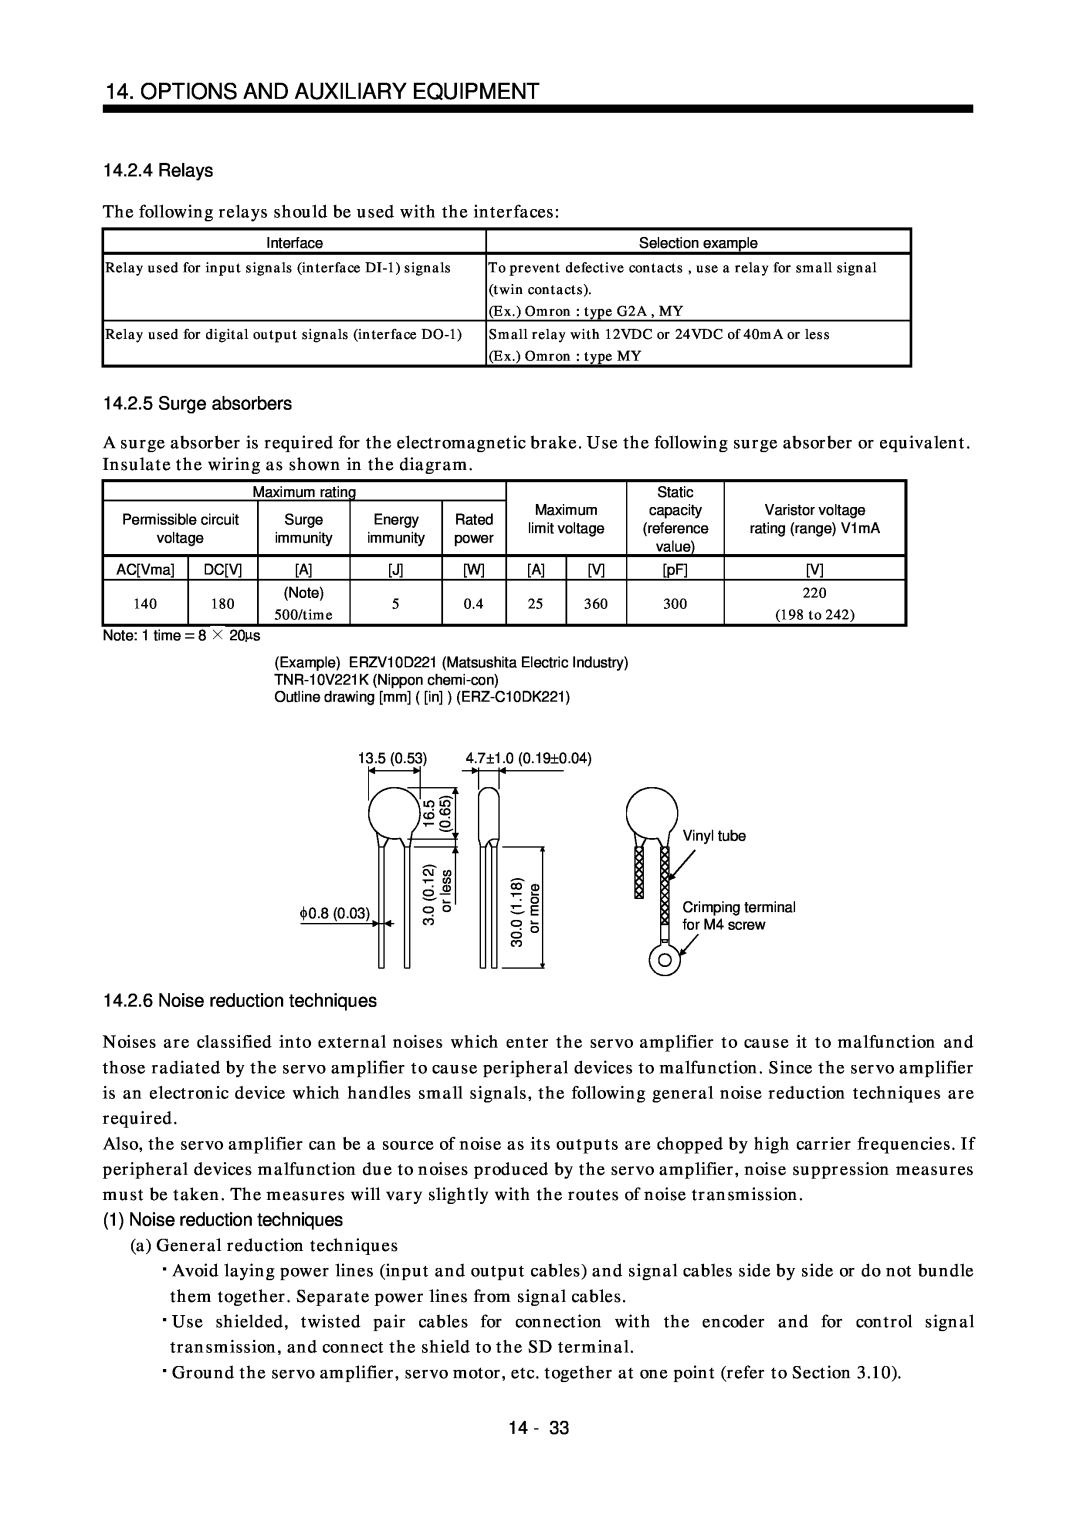 Mitsubishi Electronics MR-J2S- CL specifications Relays, Surge absorbers, 1Noise reduction techniques 